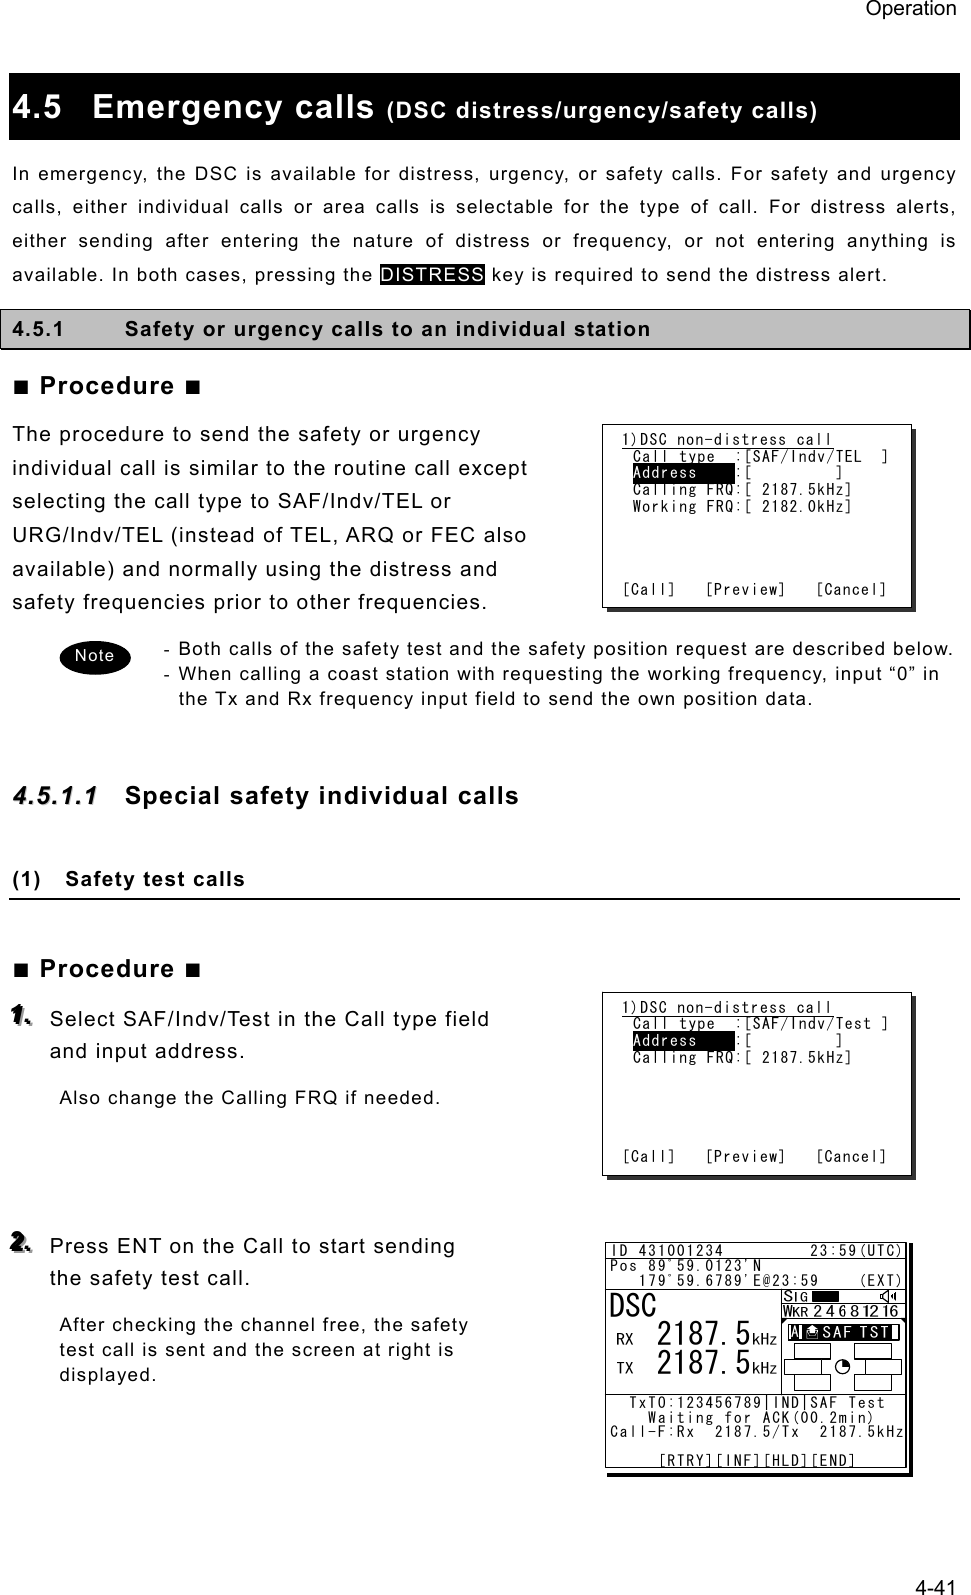 Operation 4-41  4.5 Emergency calls (DSC distress/urgency/safety calls) In emergency, the DSC is available for distress, urgency, or safety calls. For safety and urgency calls, either individual calls or area calls is selectable for the type of call. For distress alerts, either sending after entering the nature of distress or frequency, or not entering anything is available. In both cases, pressing the DISTRESS key is required to send the distress alert.   4.5.1  Safety or urgency calls to an individual station ■ Procedure ■ The procedure to send the safety or urgency individual call is similar to the routine call except selecting the call type to SAF/Indv/TEL or URG/Indv/TEL (instead of TEL, ARQ or FEC also available) and normally using the distress and safety frequencies prior to other frequencies. - Both calls of the safety test and the safety position request are described below. - When calling a coast station with requesting the working frequency, input “0” in the Tx and Rx frequency input field to send the own position data.  44..55..11..11  Special safety individual calls  (1)  Safety test calls  ■ Procedure ■ 111...   Select SAF/Indv/Test in the Call type field and input address. Also change the Calling FRQ if needed.    222...   Press ENT on the Call to start sending the safety test call. After checking the channel free, the safety test call is sent and the screen at right is displayed.  1)DSC non-distress call Call type  :[SAF/Indv/TEL  ] Address    :[         ] Calling FRQ:[ 2187.5kHz] Working FRQ:[ 2182.0kHz]     [Call]   [Preview]   [Cancel] 1)DSC non-distress call Call type  :[SAF/Indv/Test ] Address    :[         ] Calling FRQ:[ 2187.5kHz]      [Call]   [Preview]   [Cancel] Note ID 431001234         23:59(UTC)Pos 89ﾟ59.0123&apos;N   179ﾟ59.6789&apos;E@23:59    (EXT)  TxTO:123456789|IND|SAF Test     Waiting for ACK(00.2min)Call-F:Rx  2187.5/Tx  2187.5kHz     [RTRY][INF][HLD][END]DSC   2187.5   2187.5A  A  